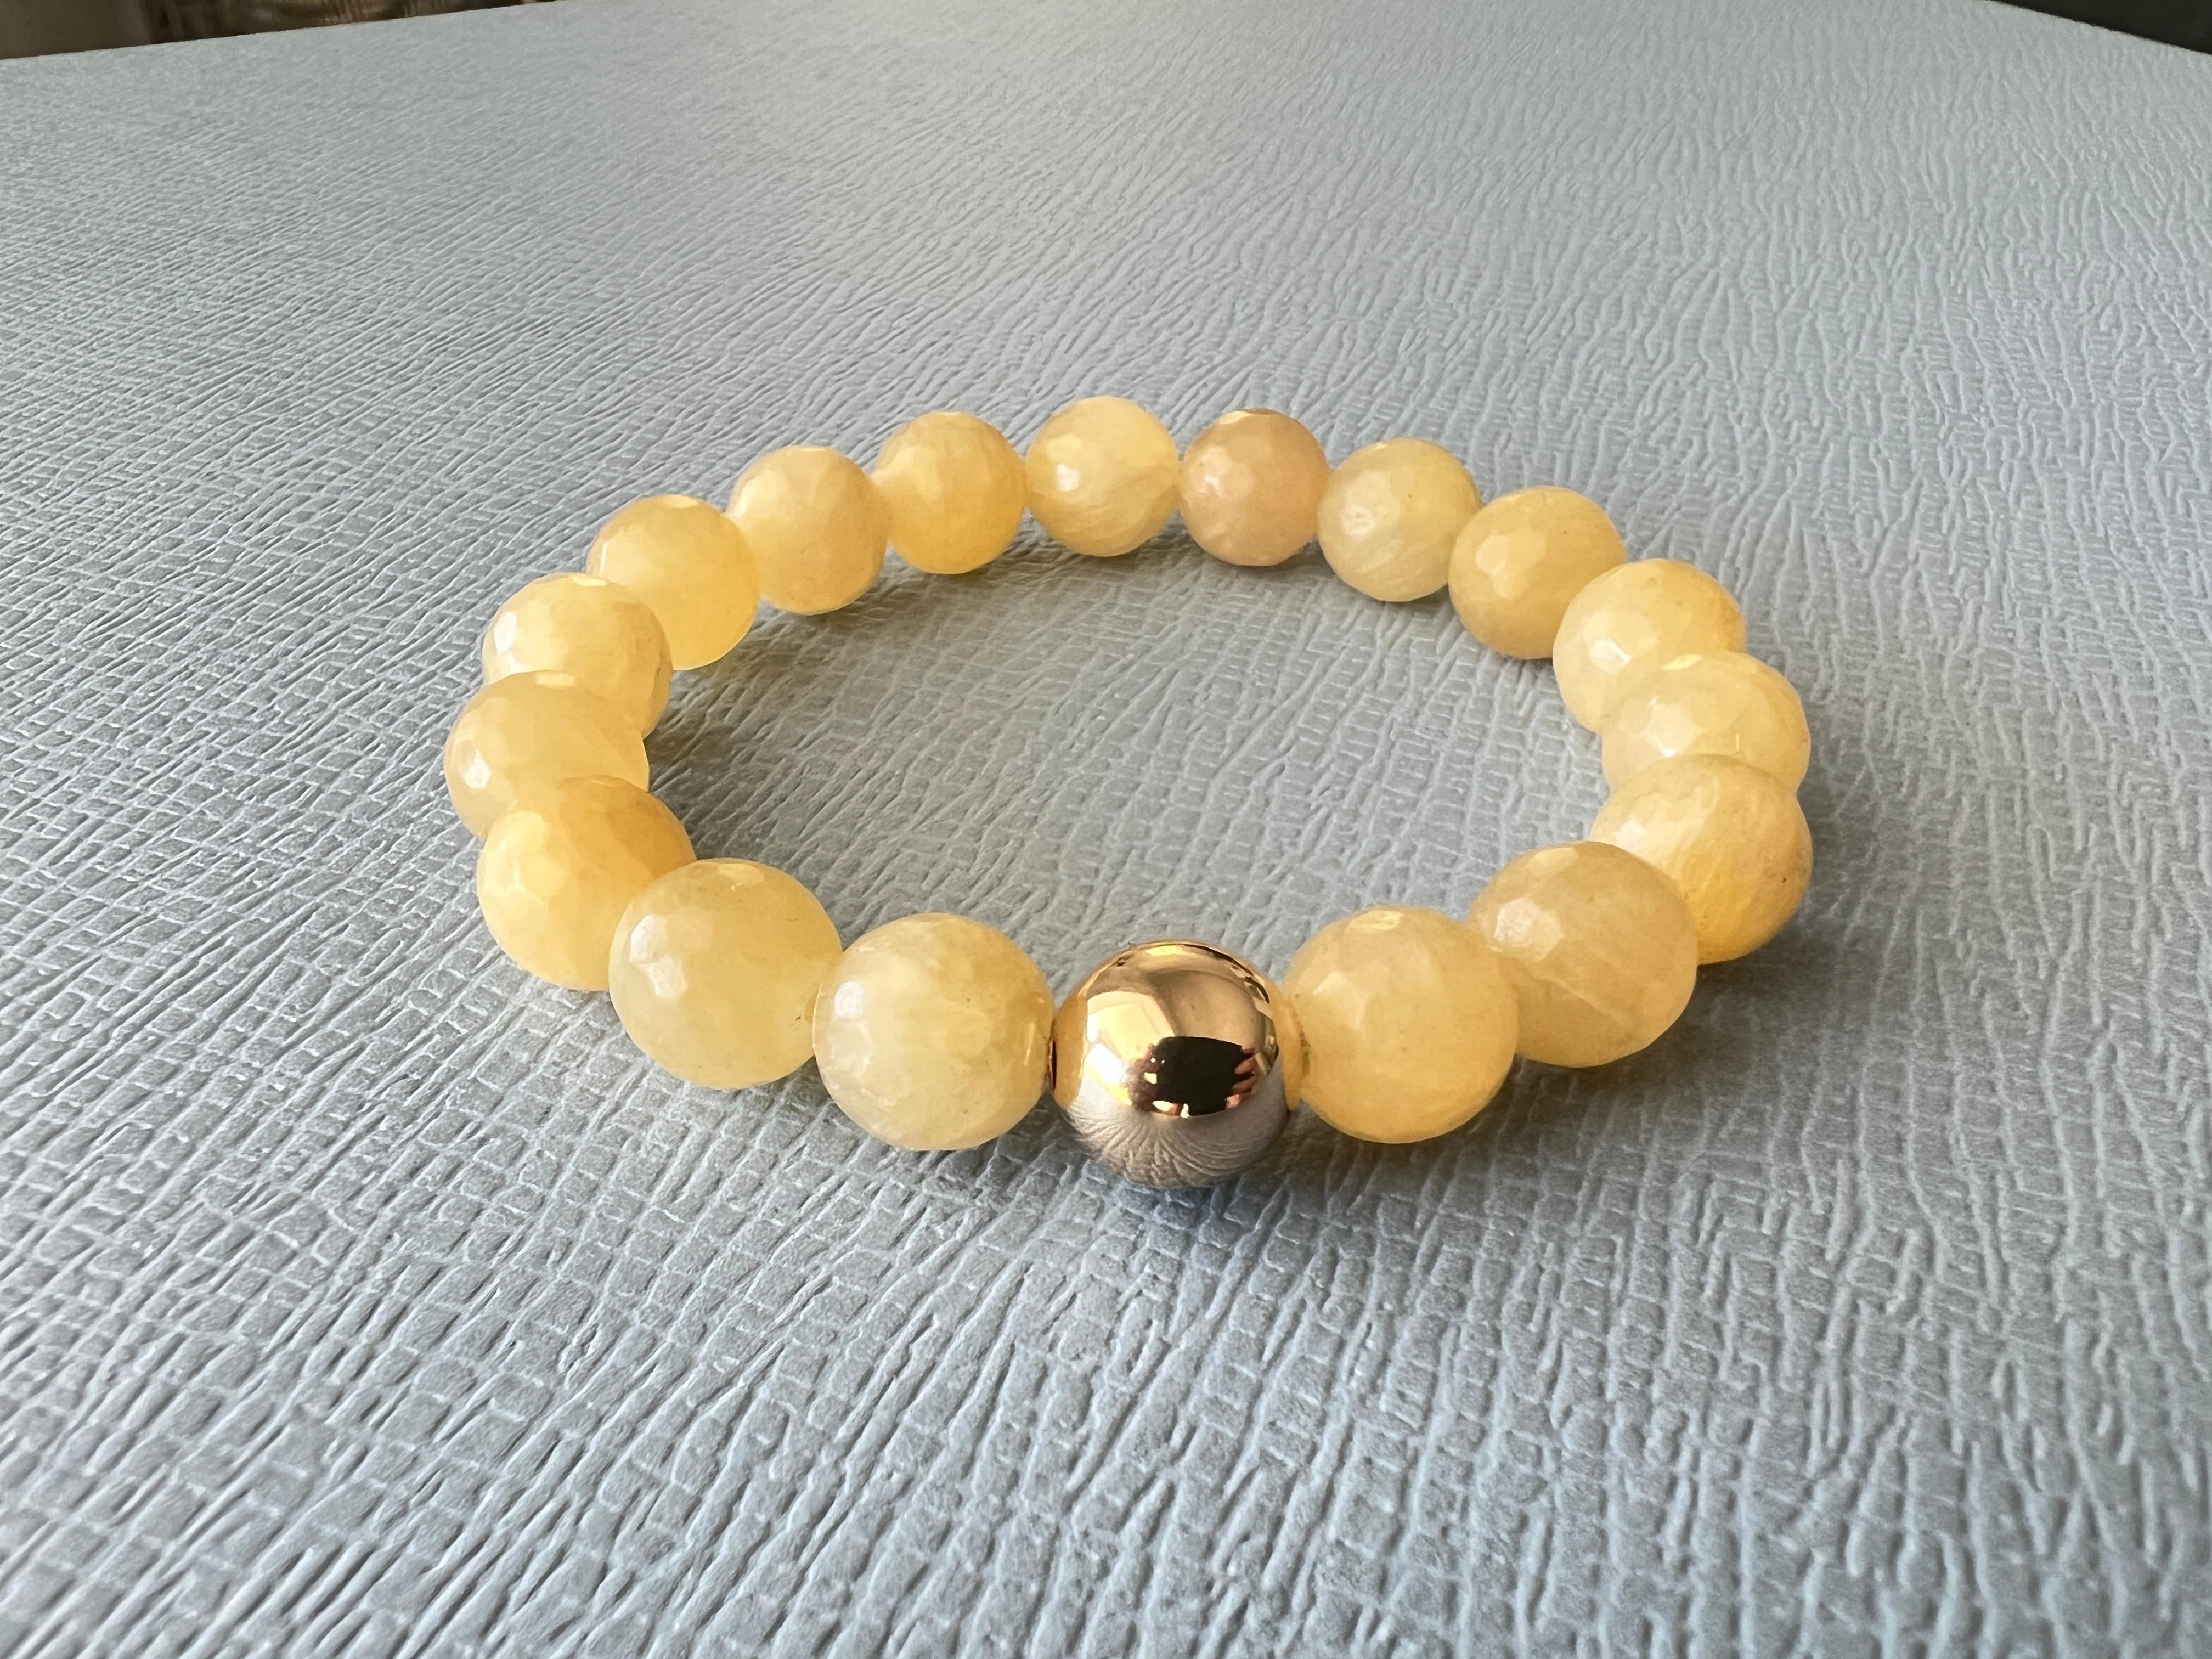 Yellow Calcite Round Facteted Bead Bracelet Gold Filled Bead J Dauphin For Sale 8